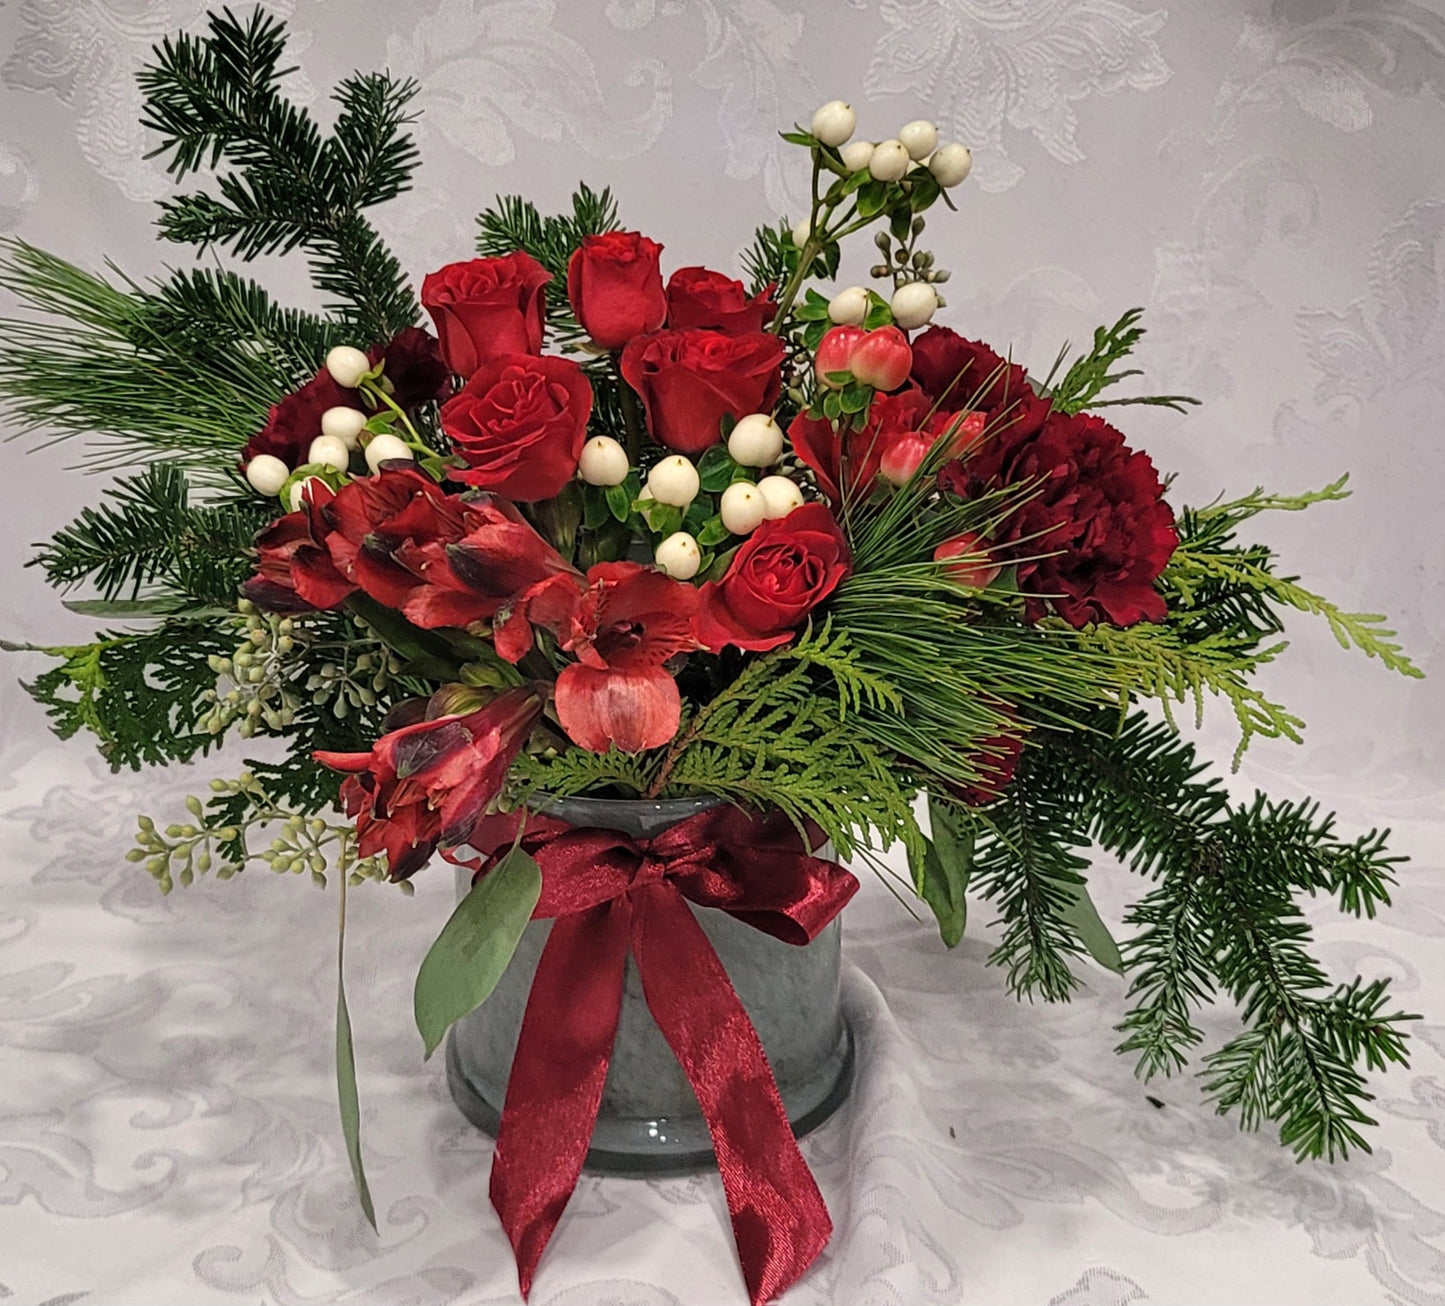 Fresh Evergreen and Flowers Centerpiece - Small